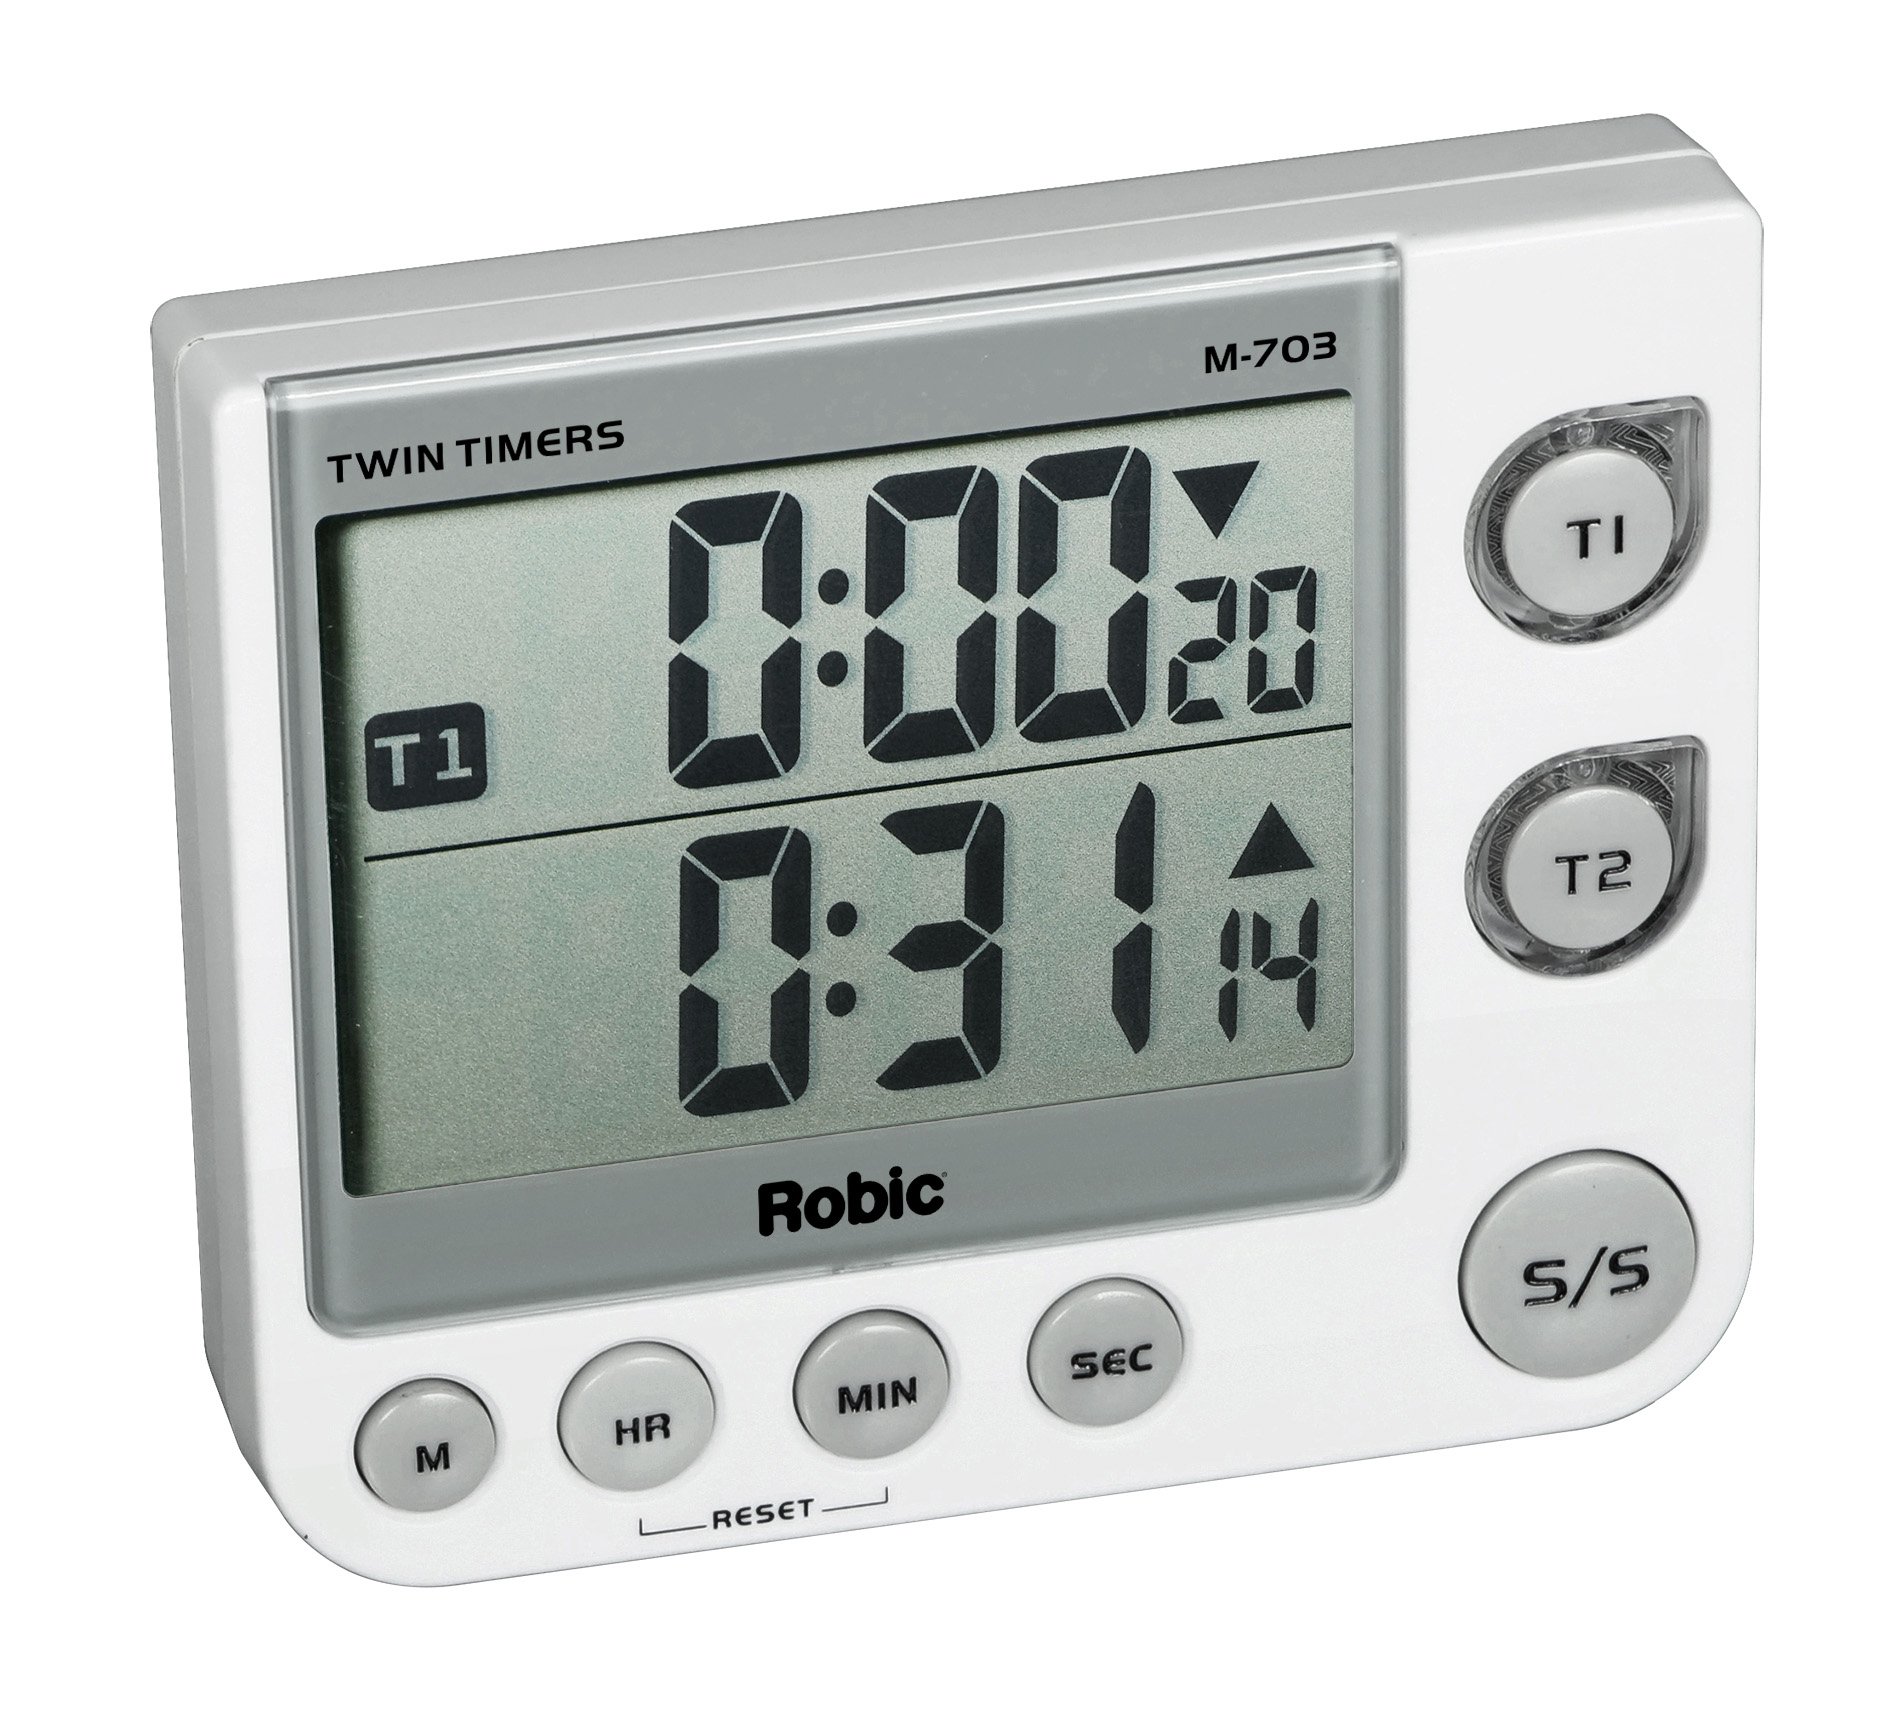 Robic M-703 Twin Timers; Countdown, Countup Game and Activity Timer; Flashing LED confirms Activity, Silent, Medium or Extra Loud Alarm at Completion…America's Timer, White, One Size